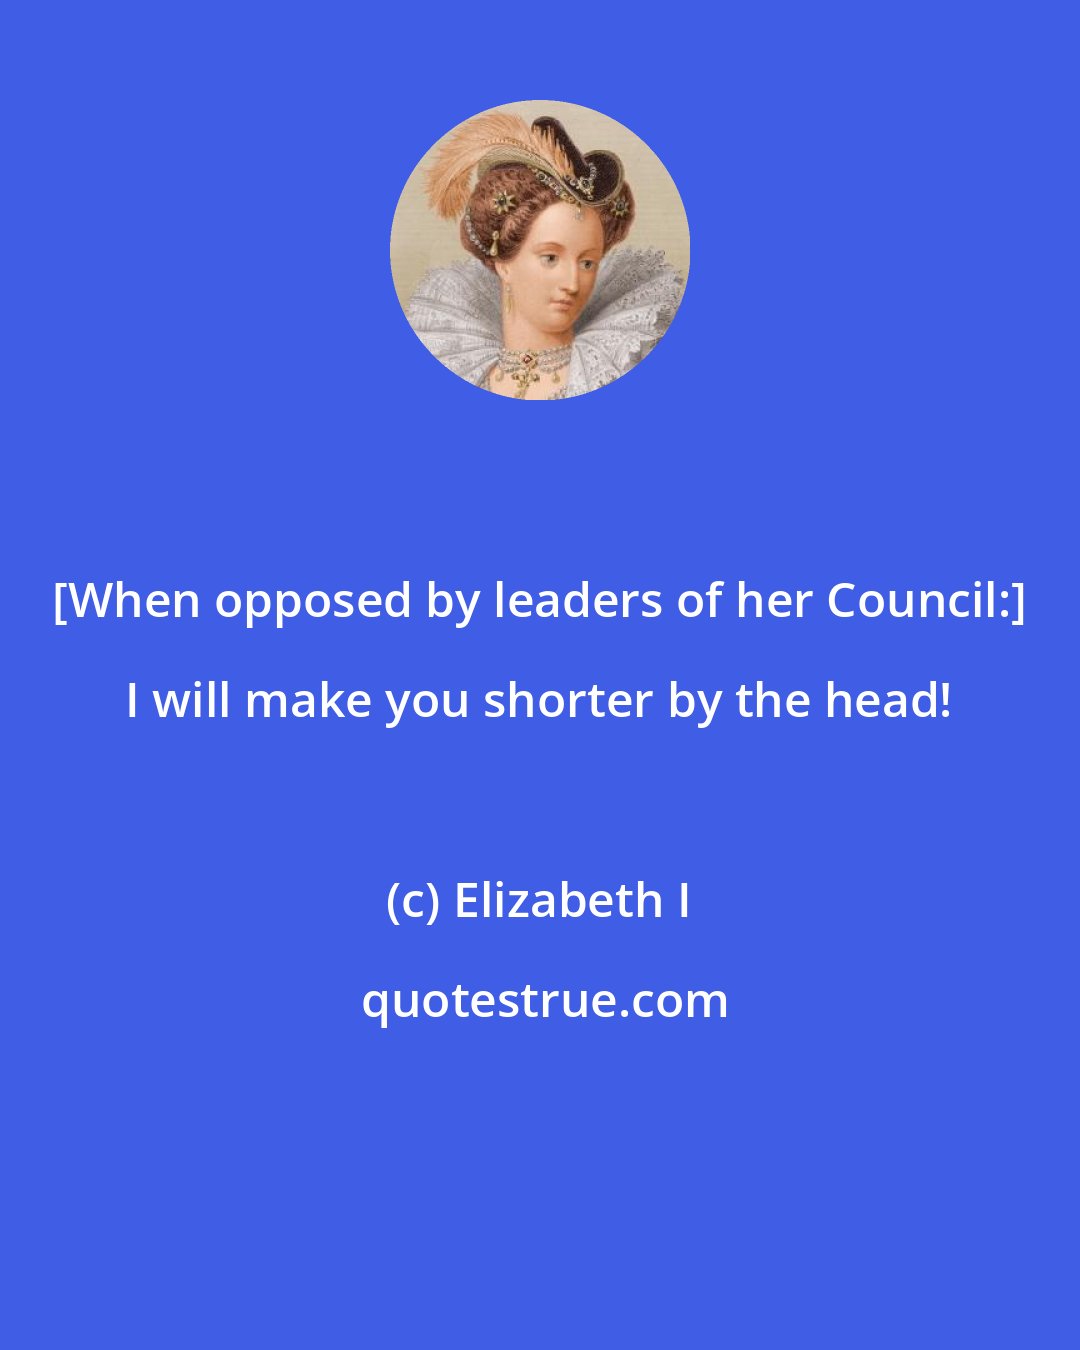 Elizabeth I: [When opposed by leaders of her Council:] I will make you shorter by the head!